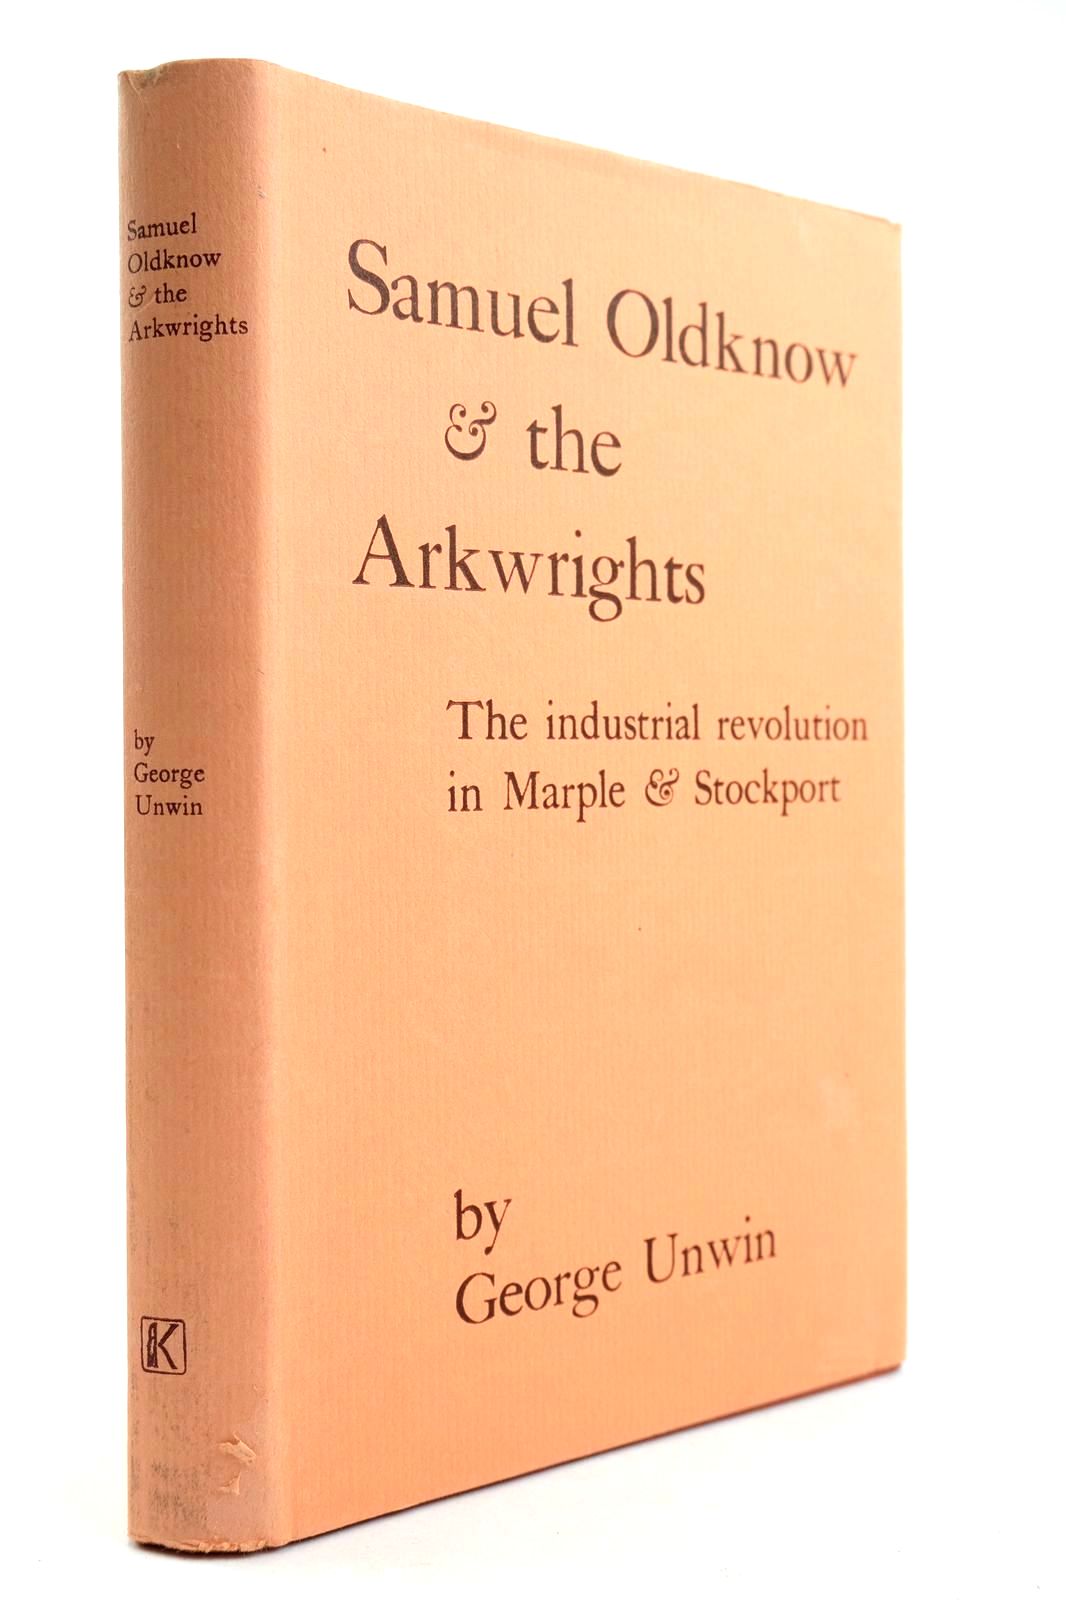 Photo of SAMUEL OLDKNOW AND THE ARKWRIGHTS written by Unwin, George Hulme, Arthur Taylor, George Chaloner, W.H. published by Augustus M. Kelley (STOCK CODE: 2132571)  for sale by Stella & Rose's Books